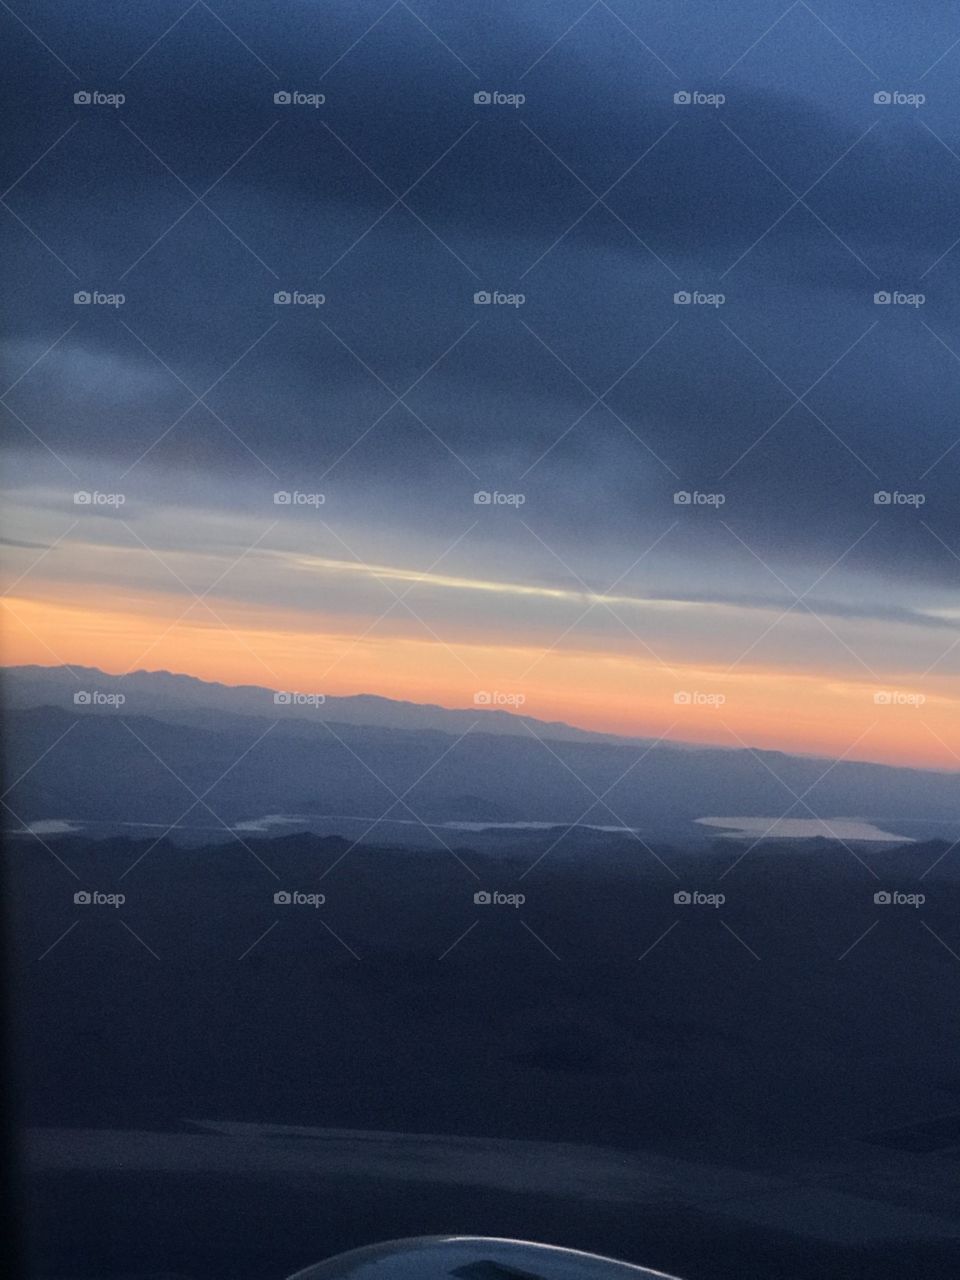 Leaving Las Vegas on the airplane this was taking from my seat window. The beauty of this view of the mountains at dawn was speechless